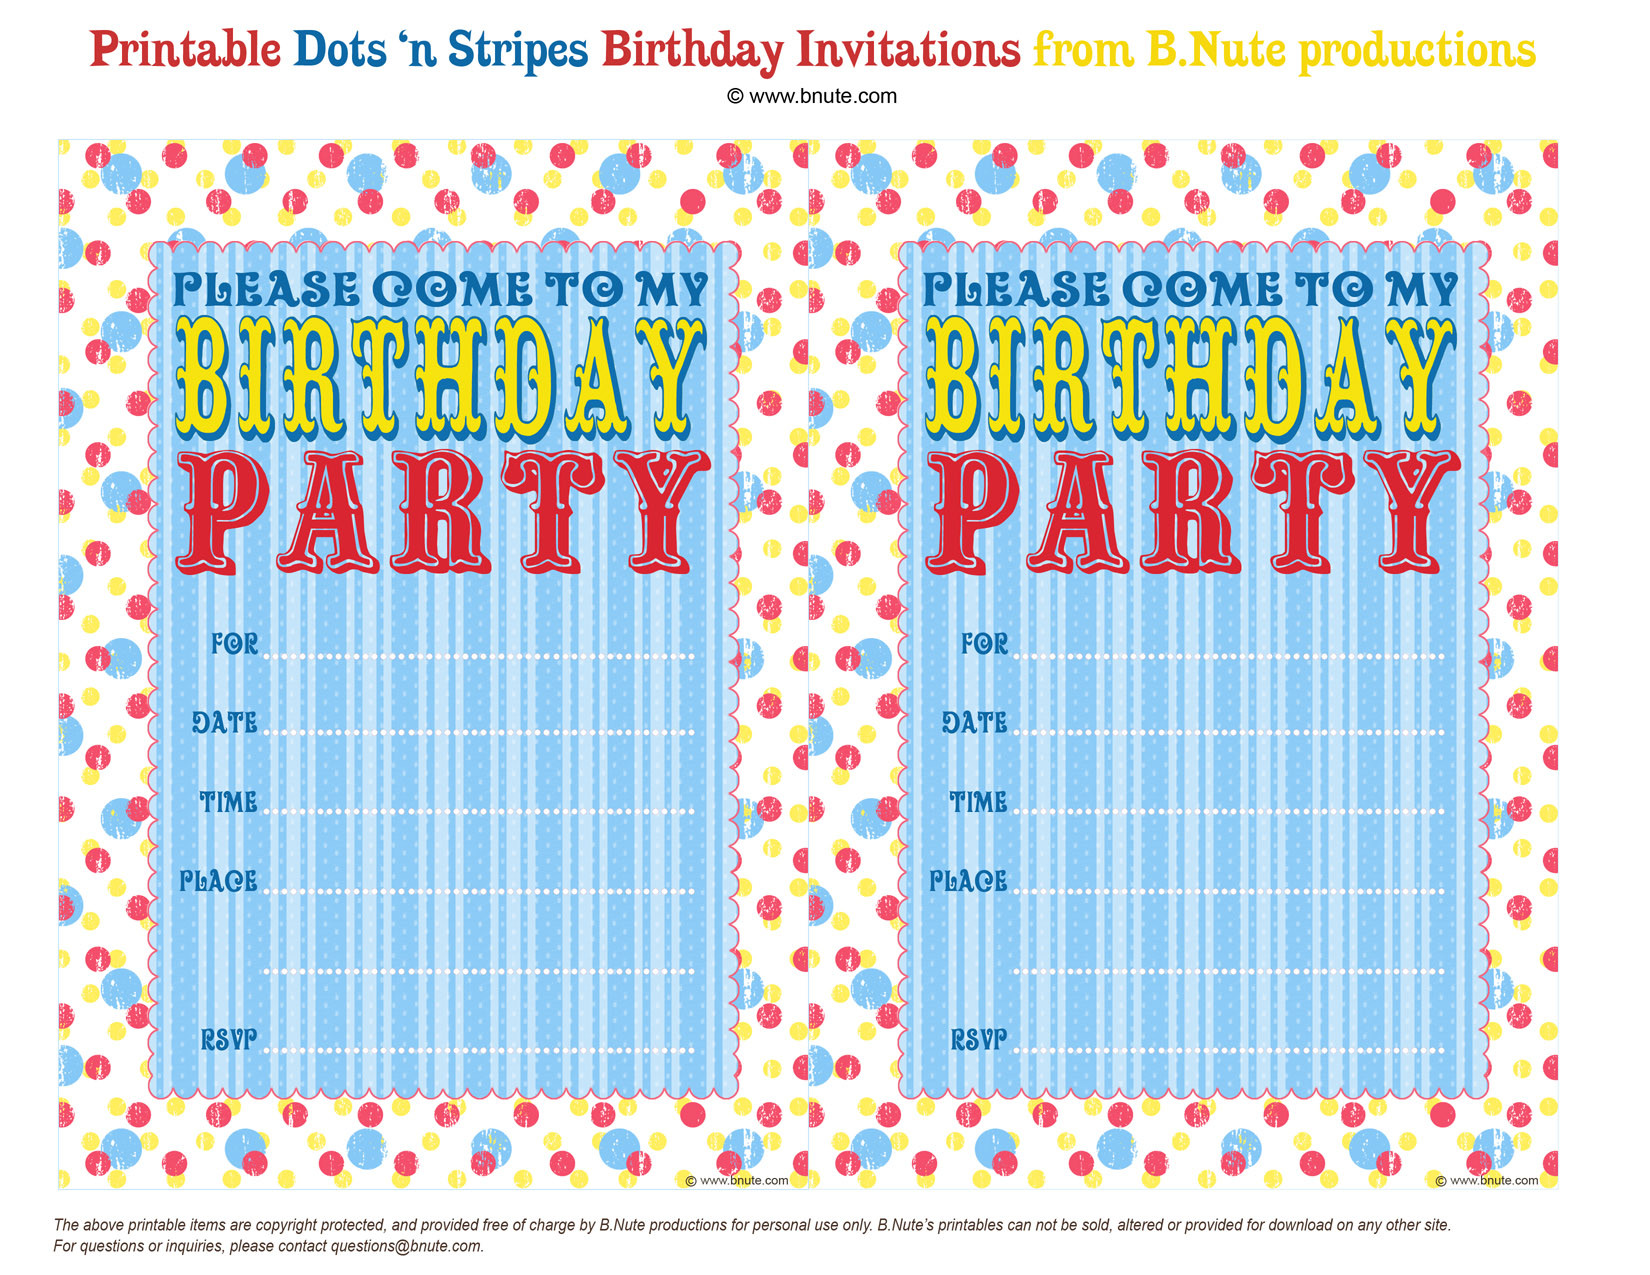 Free Birthday Party Invitations
 bnute productions Free Printable Dots n Stripes Birthday